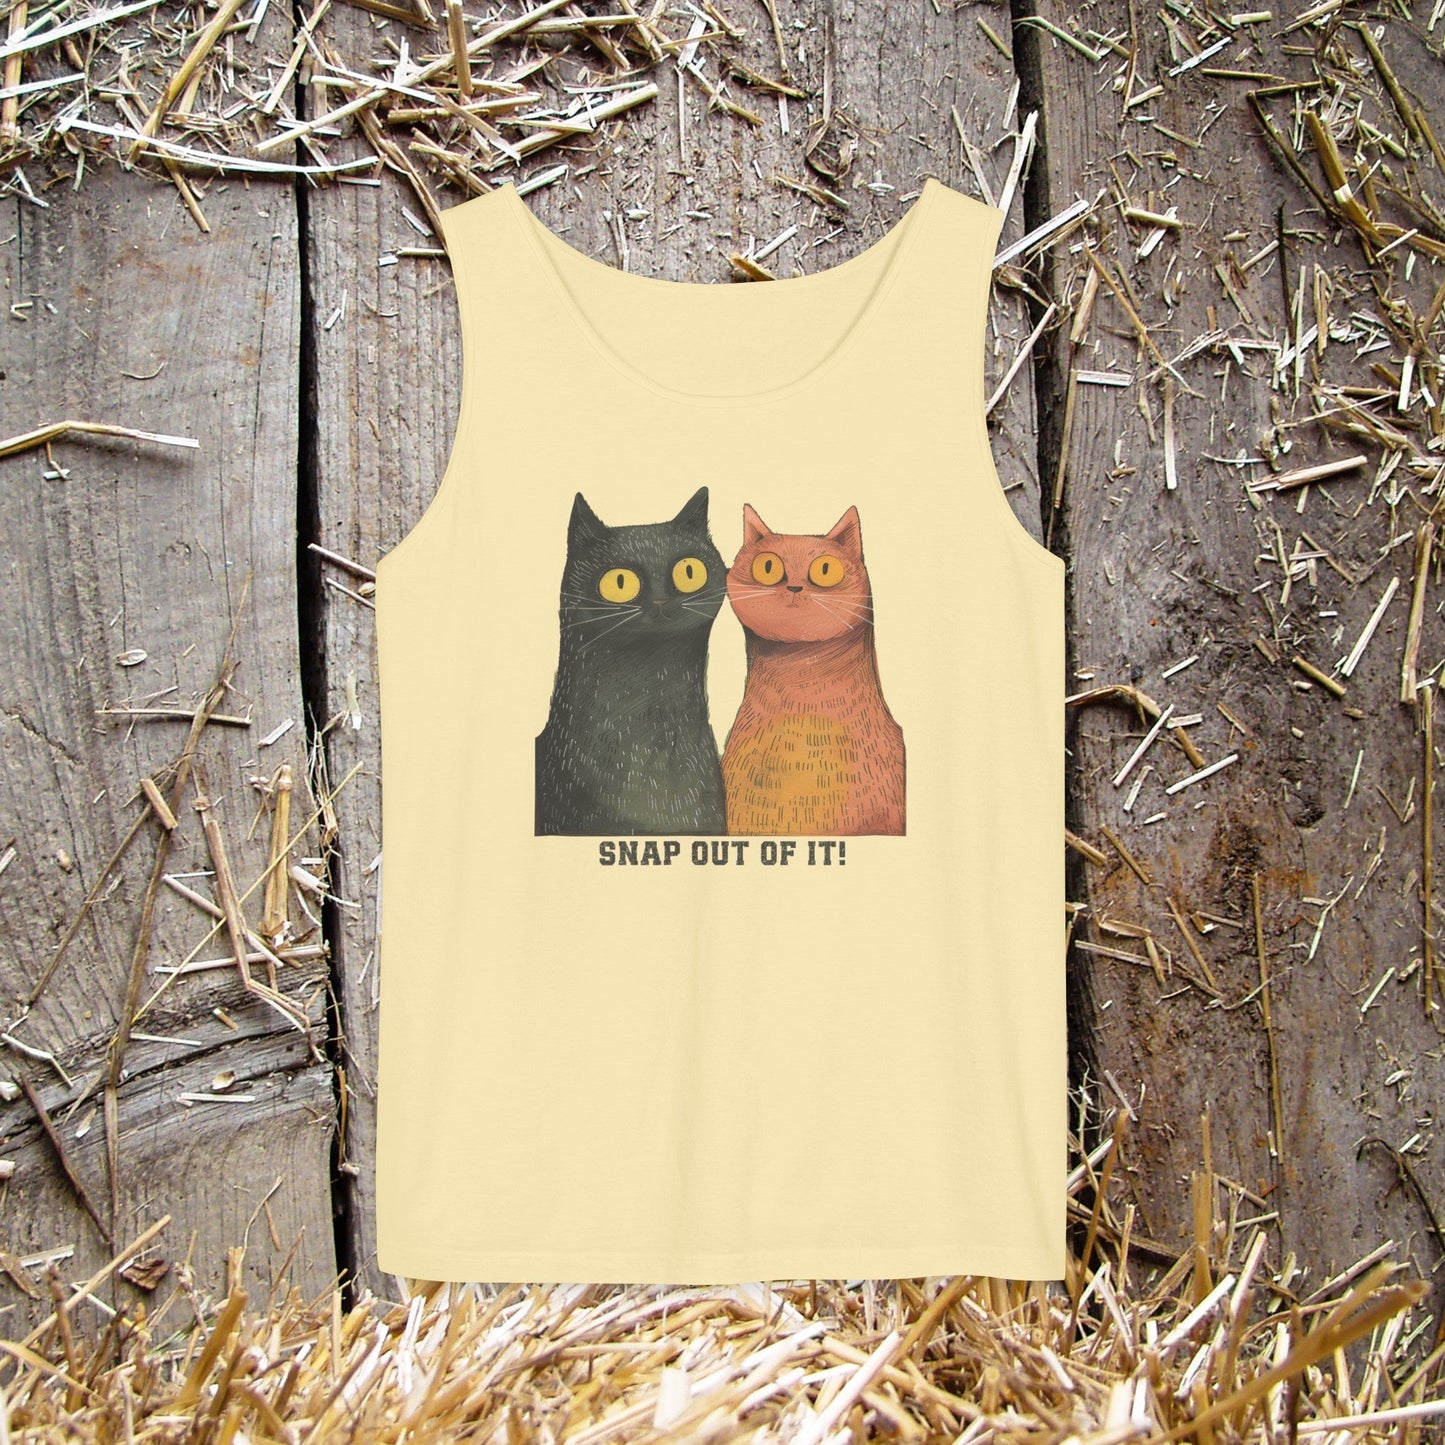 Fun Cat Tank Top, "Snap out of it!", Two Cat Lover T - Shirt, Whimsical Cat - FlooredByArt